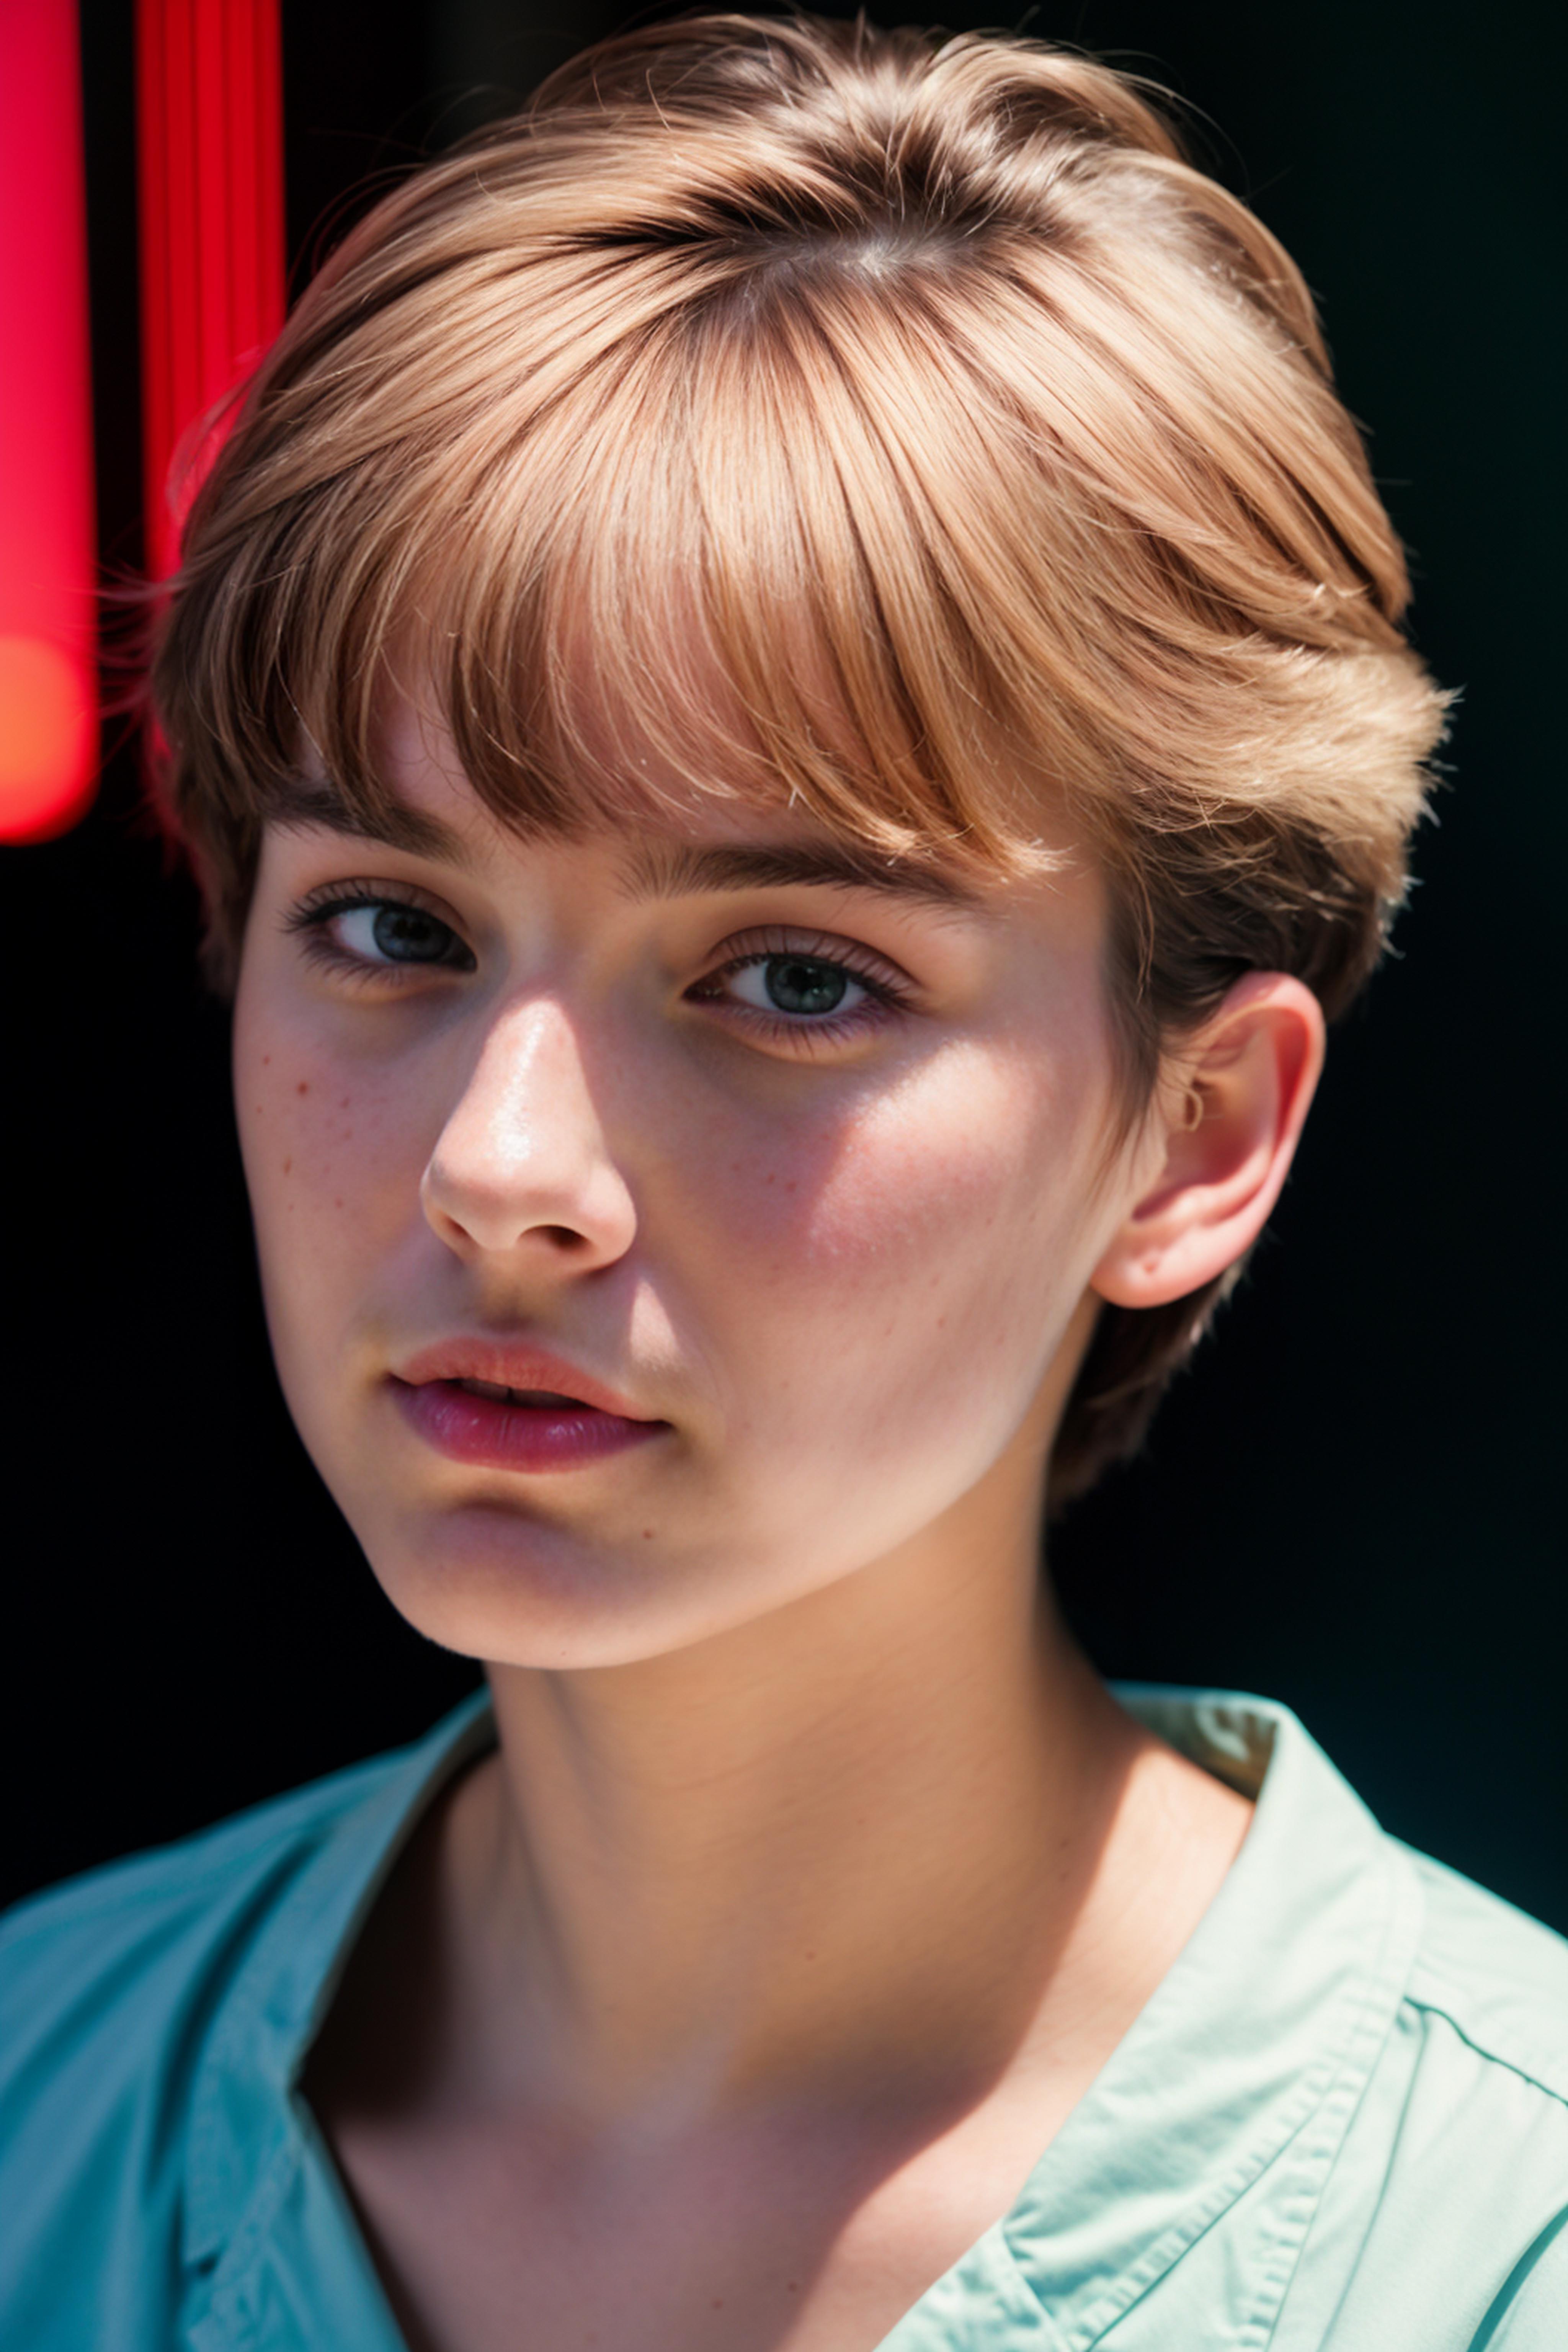 A close-up of a girl's face with a short haircut and green shirt.